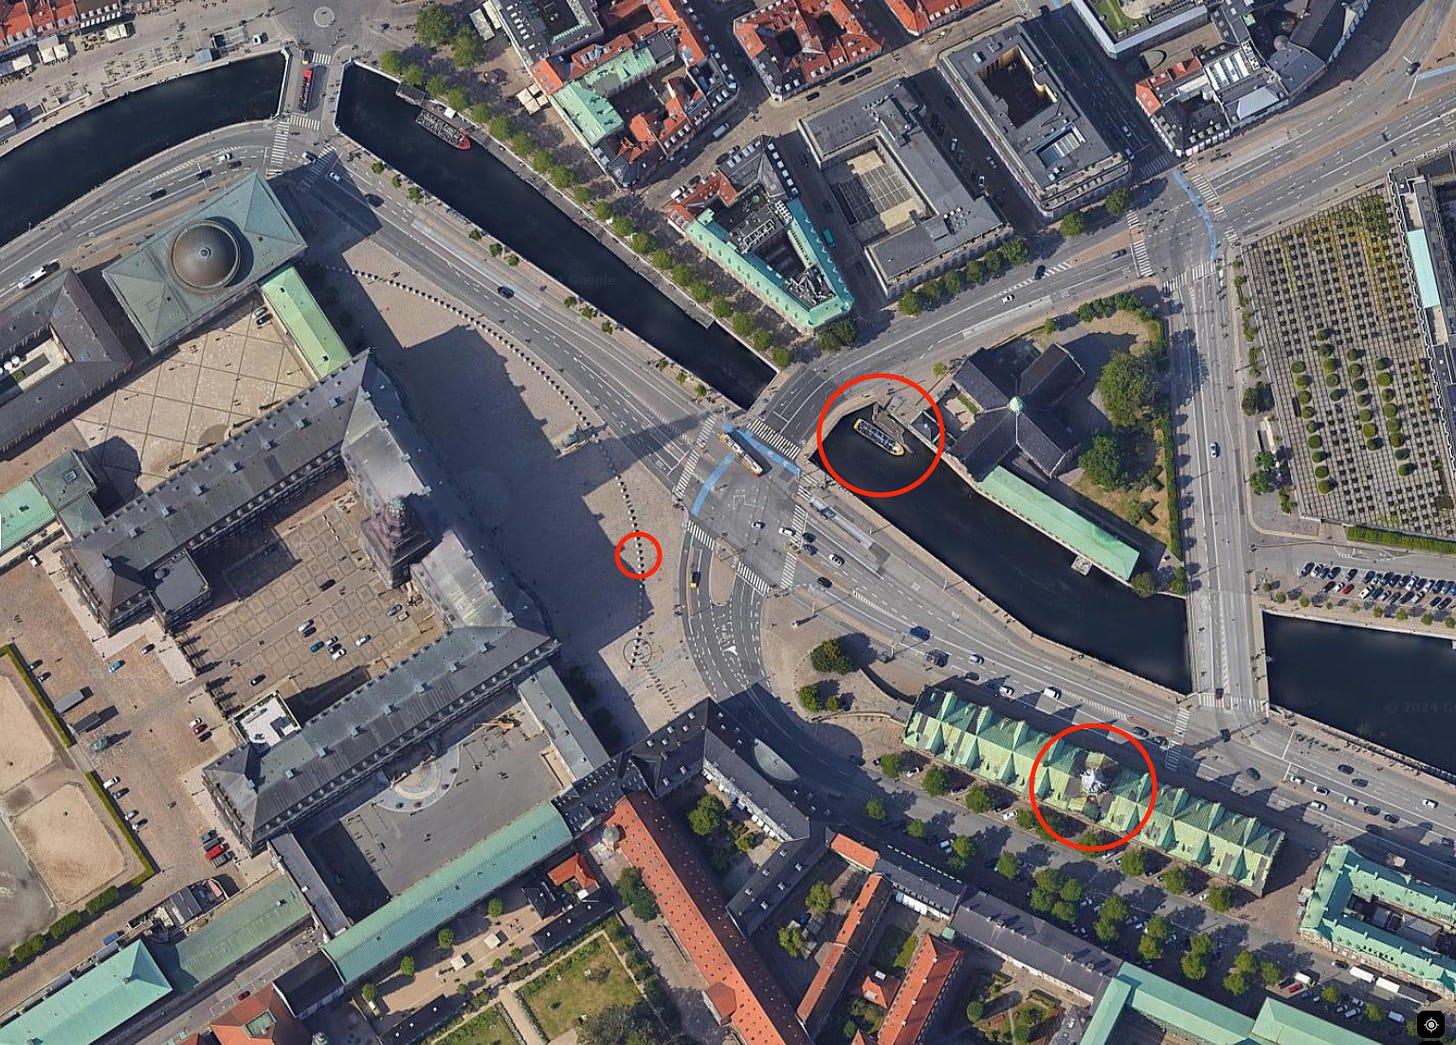 Satellite image of part of the island of Slotsholmen, with red circles highlighting locations mentioned in this article